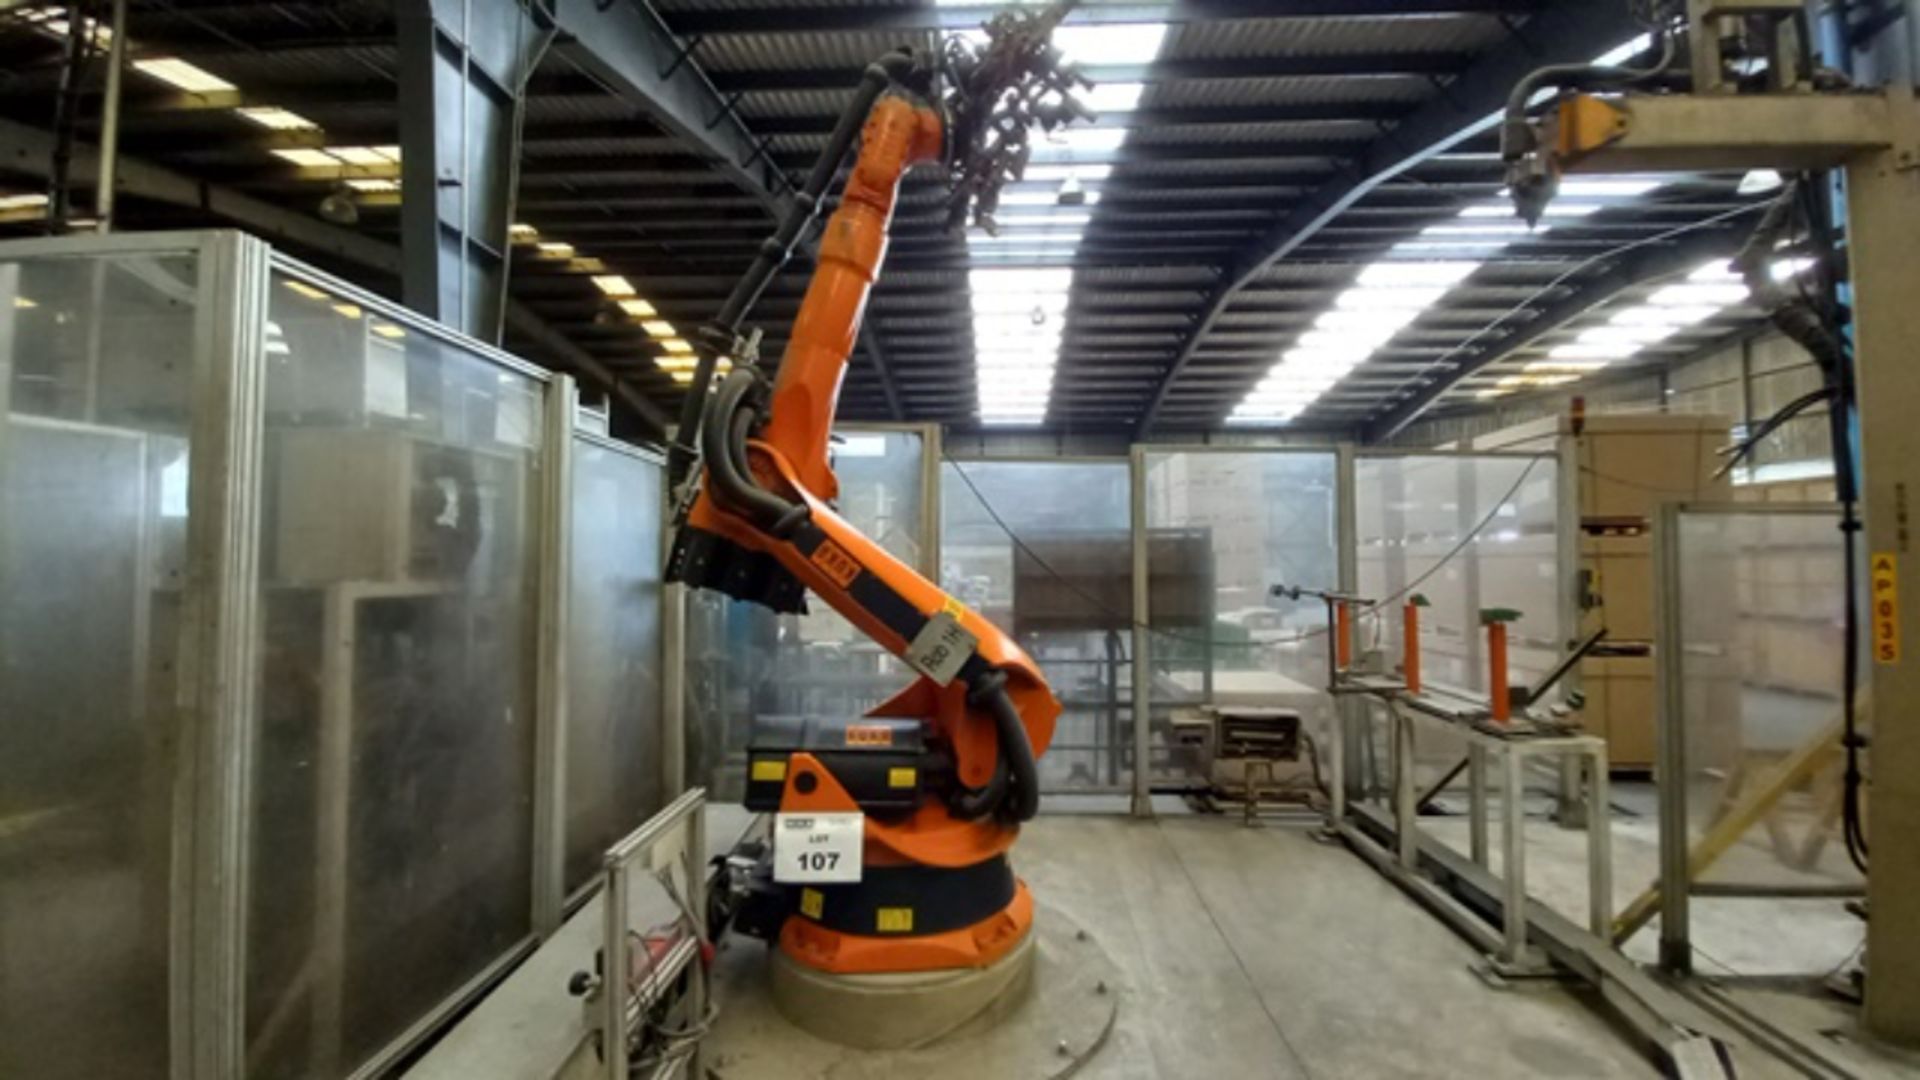 Kuka KR210L150 Robot, Maximum Reach: 3,100 mm, Rated Payload: 150 Kg, Robot Controller, New 2003 - Image 2 of 4